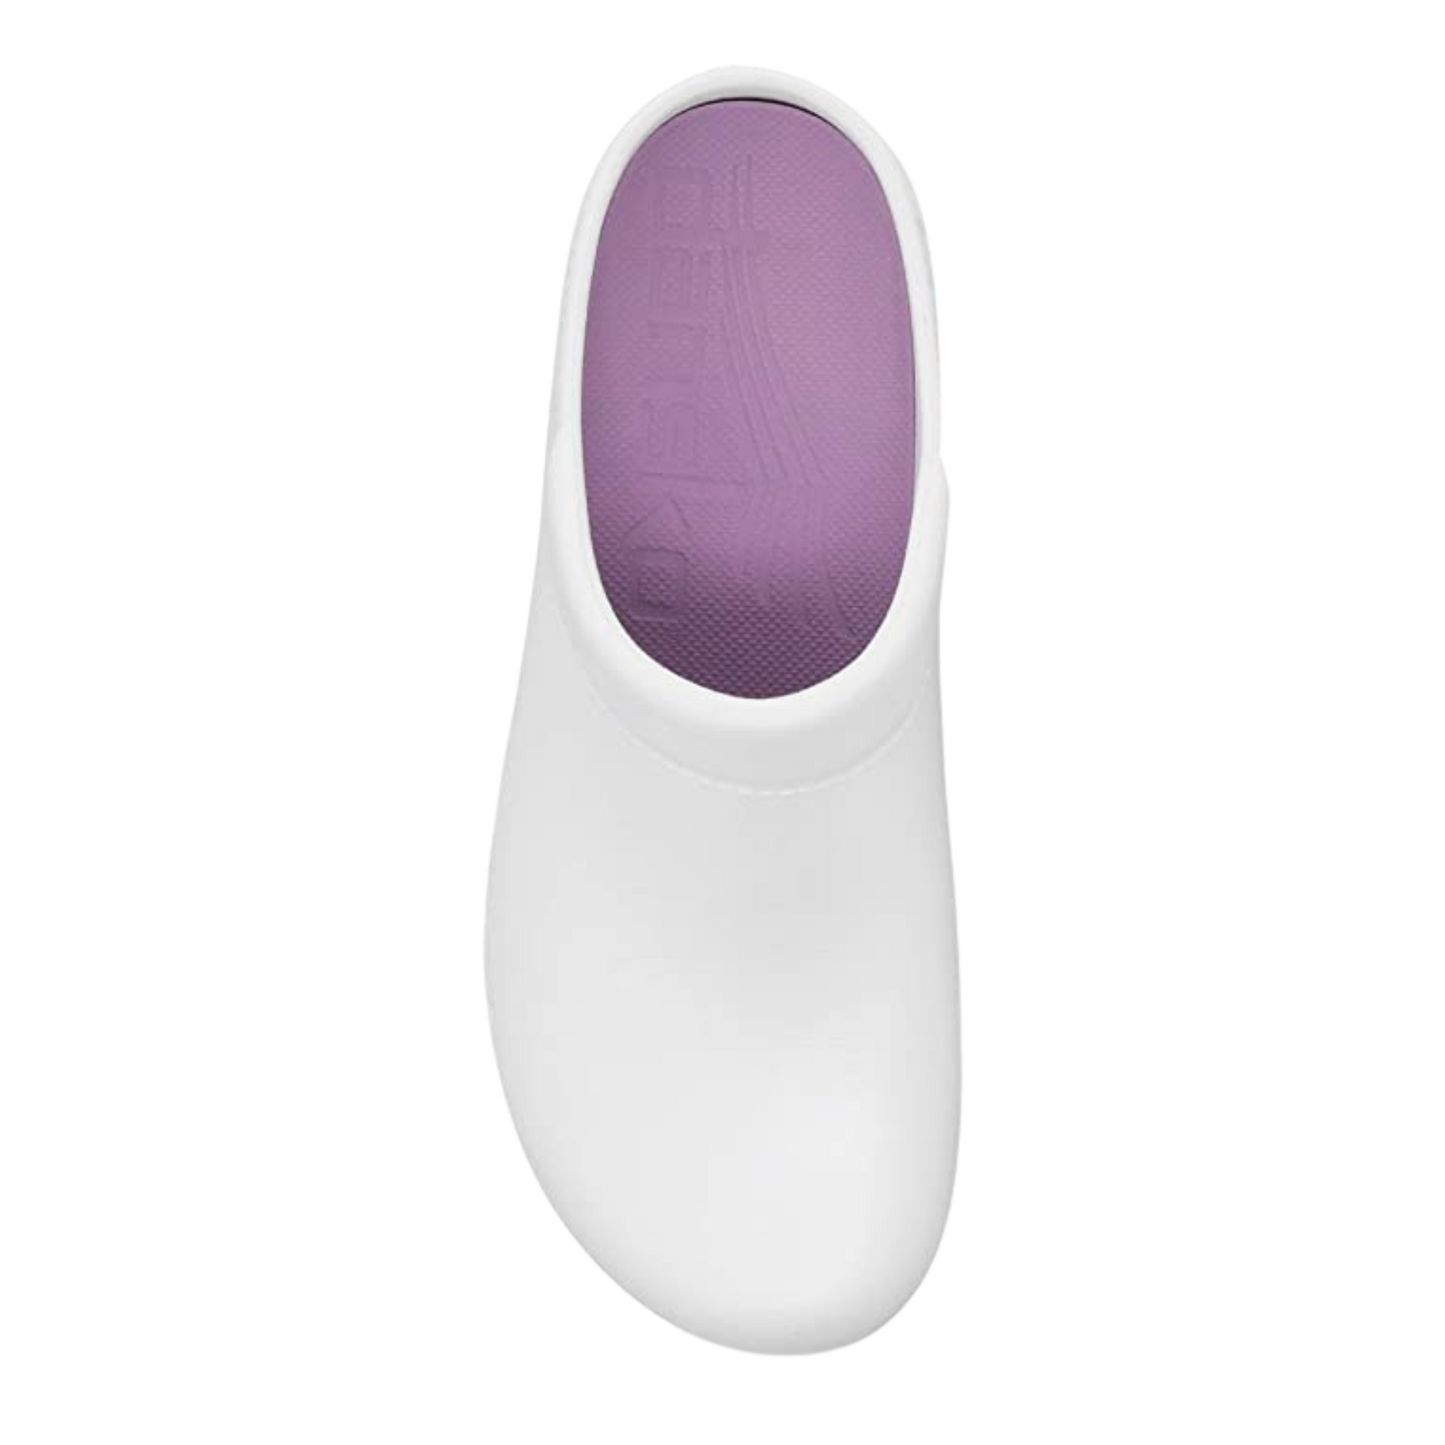 A top view of a white clog with five small holes in the side and a light purple insole.